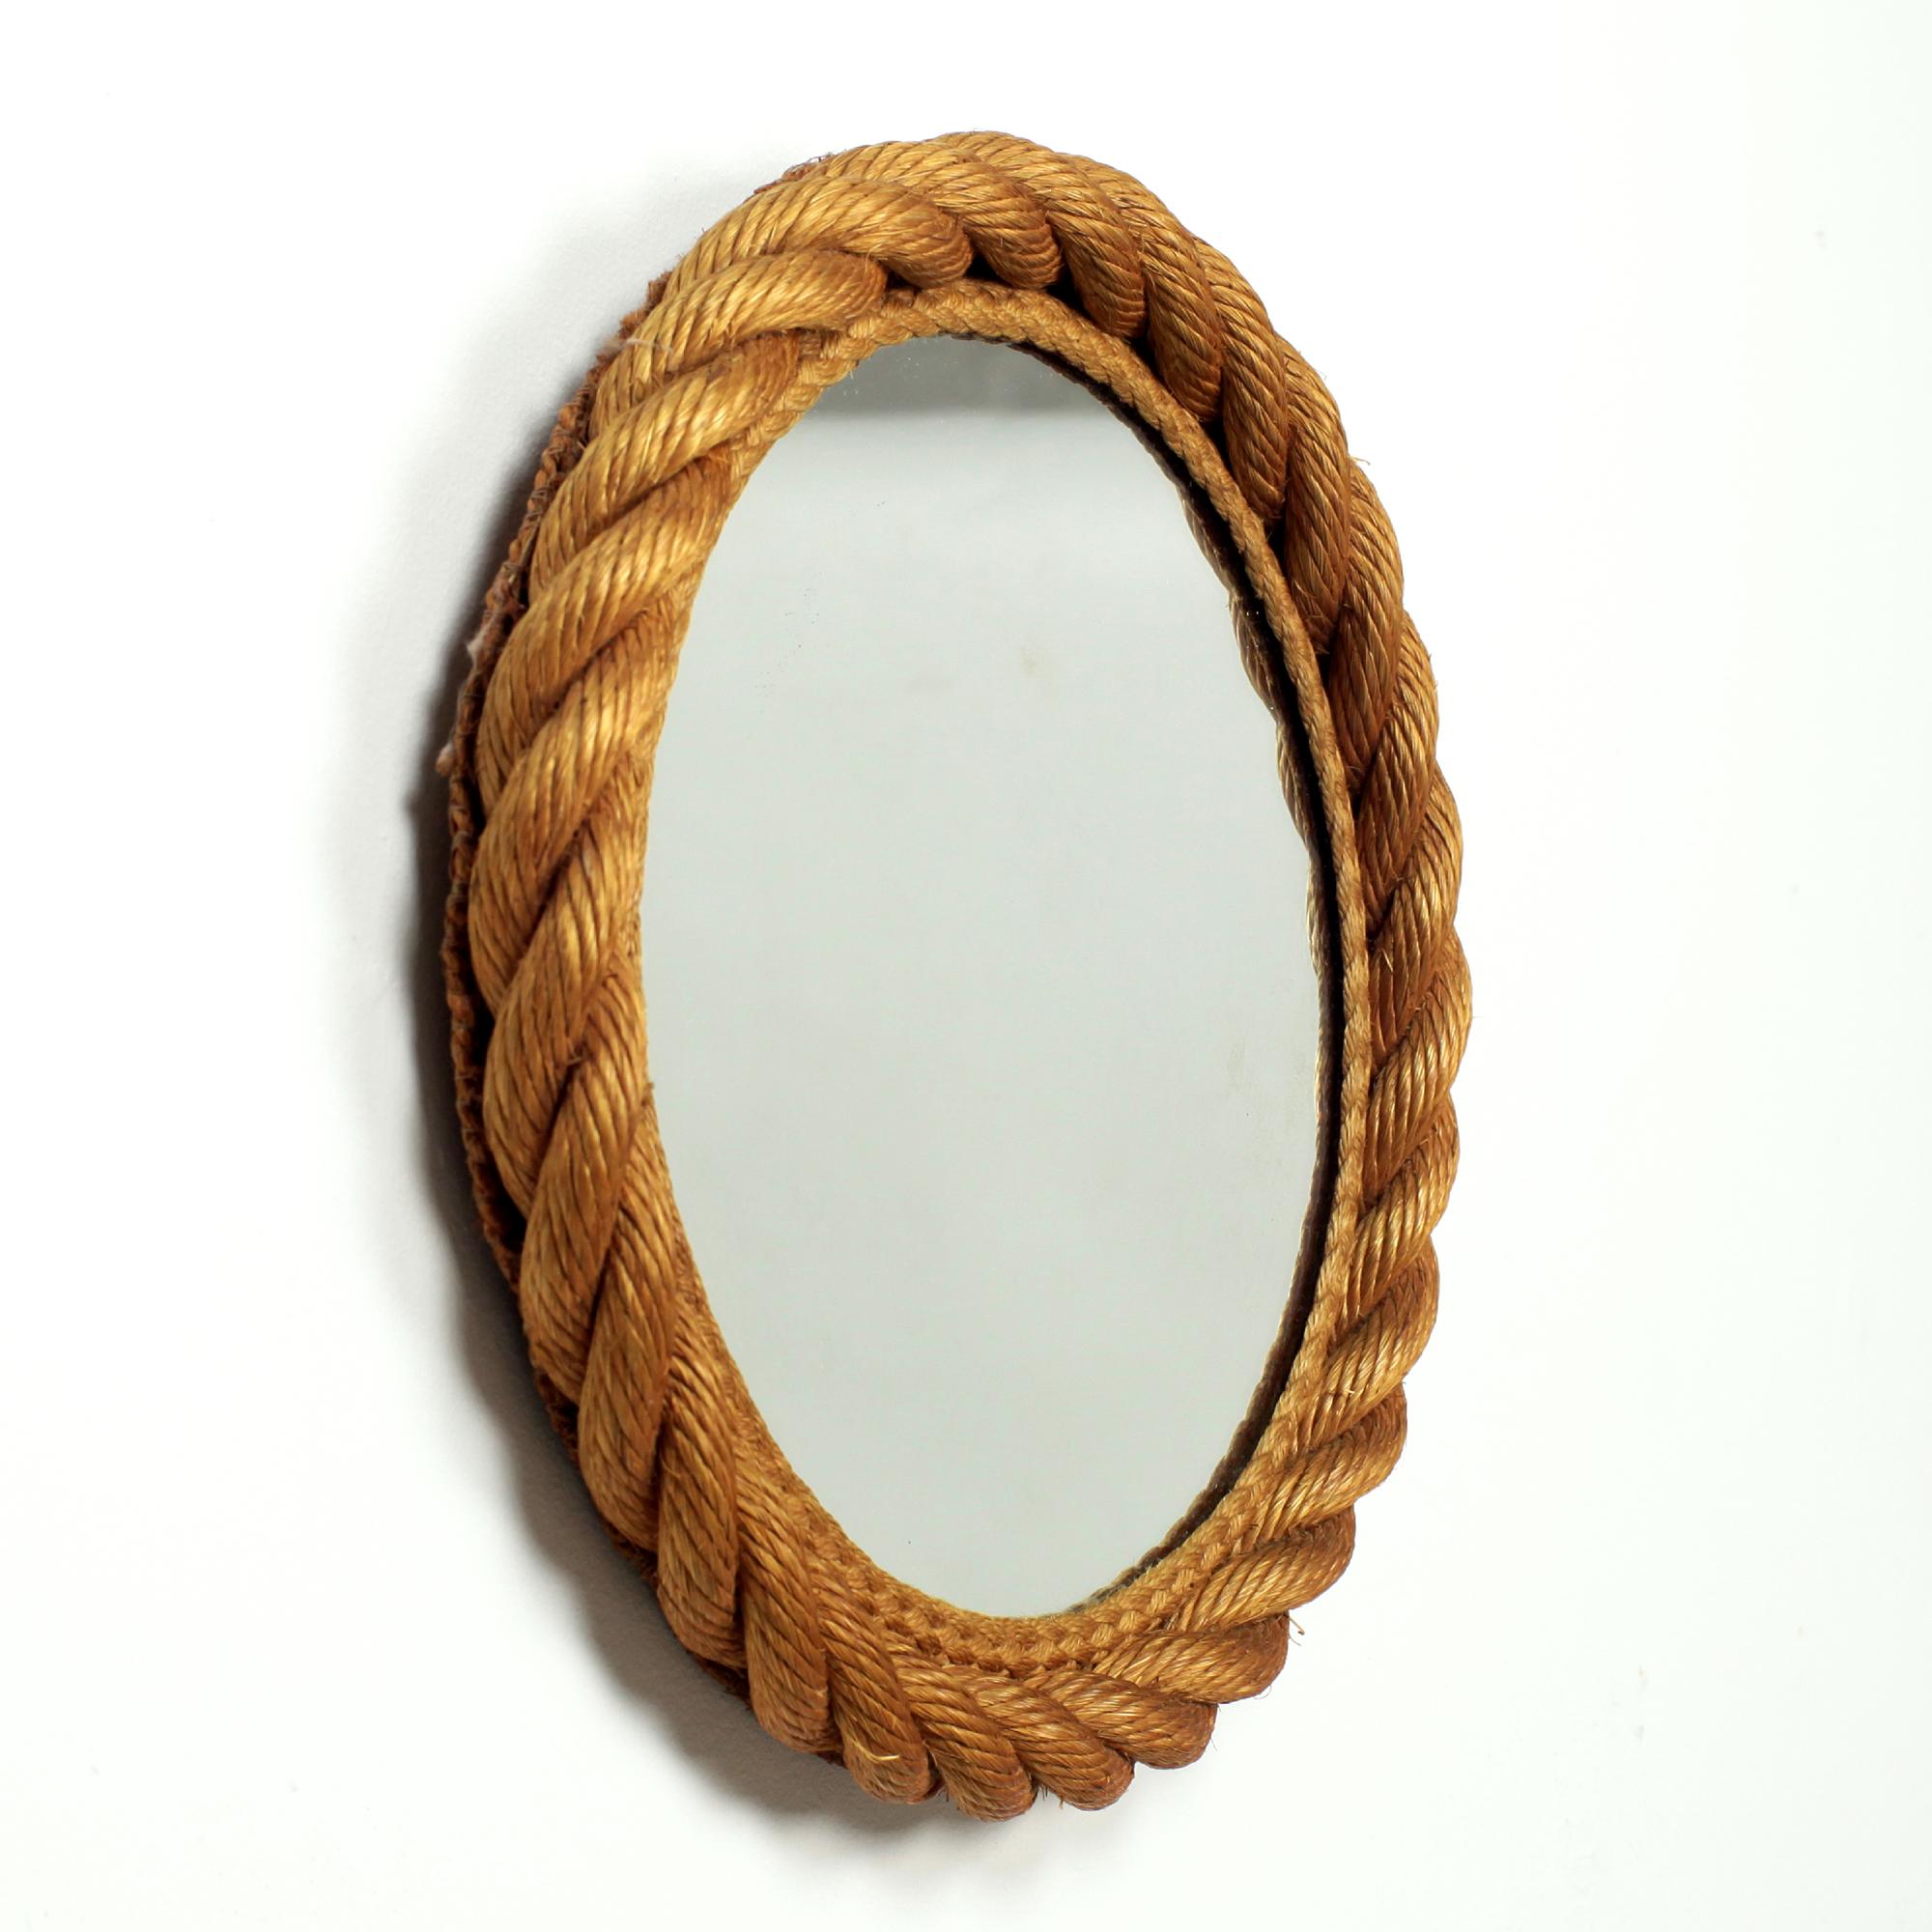 A beautiful wall mirror designed by Audoux Minet in Golfe-Juan on the French Riviera in the 1960s.
Hand crafted rope round frame
This iconic Audoux Minet rope design mirror is in excellent original condition, with a great patina.

